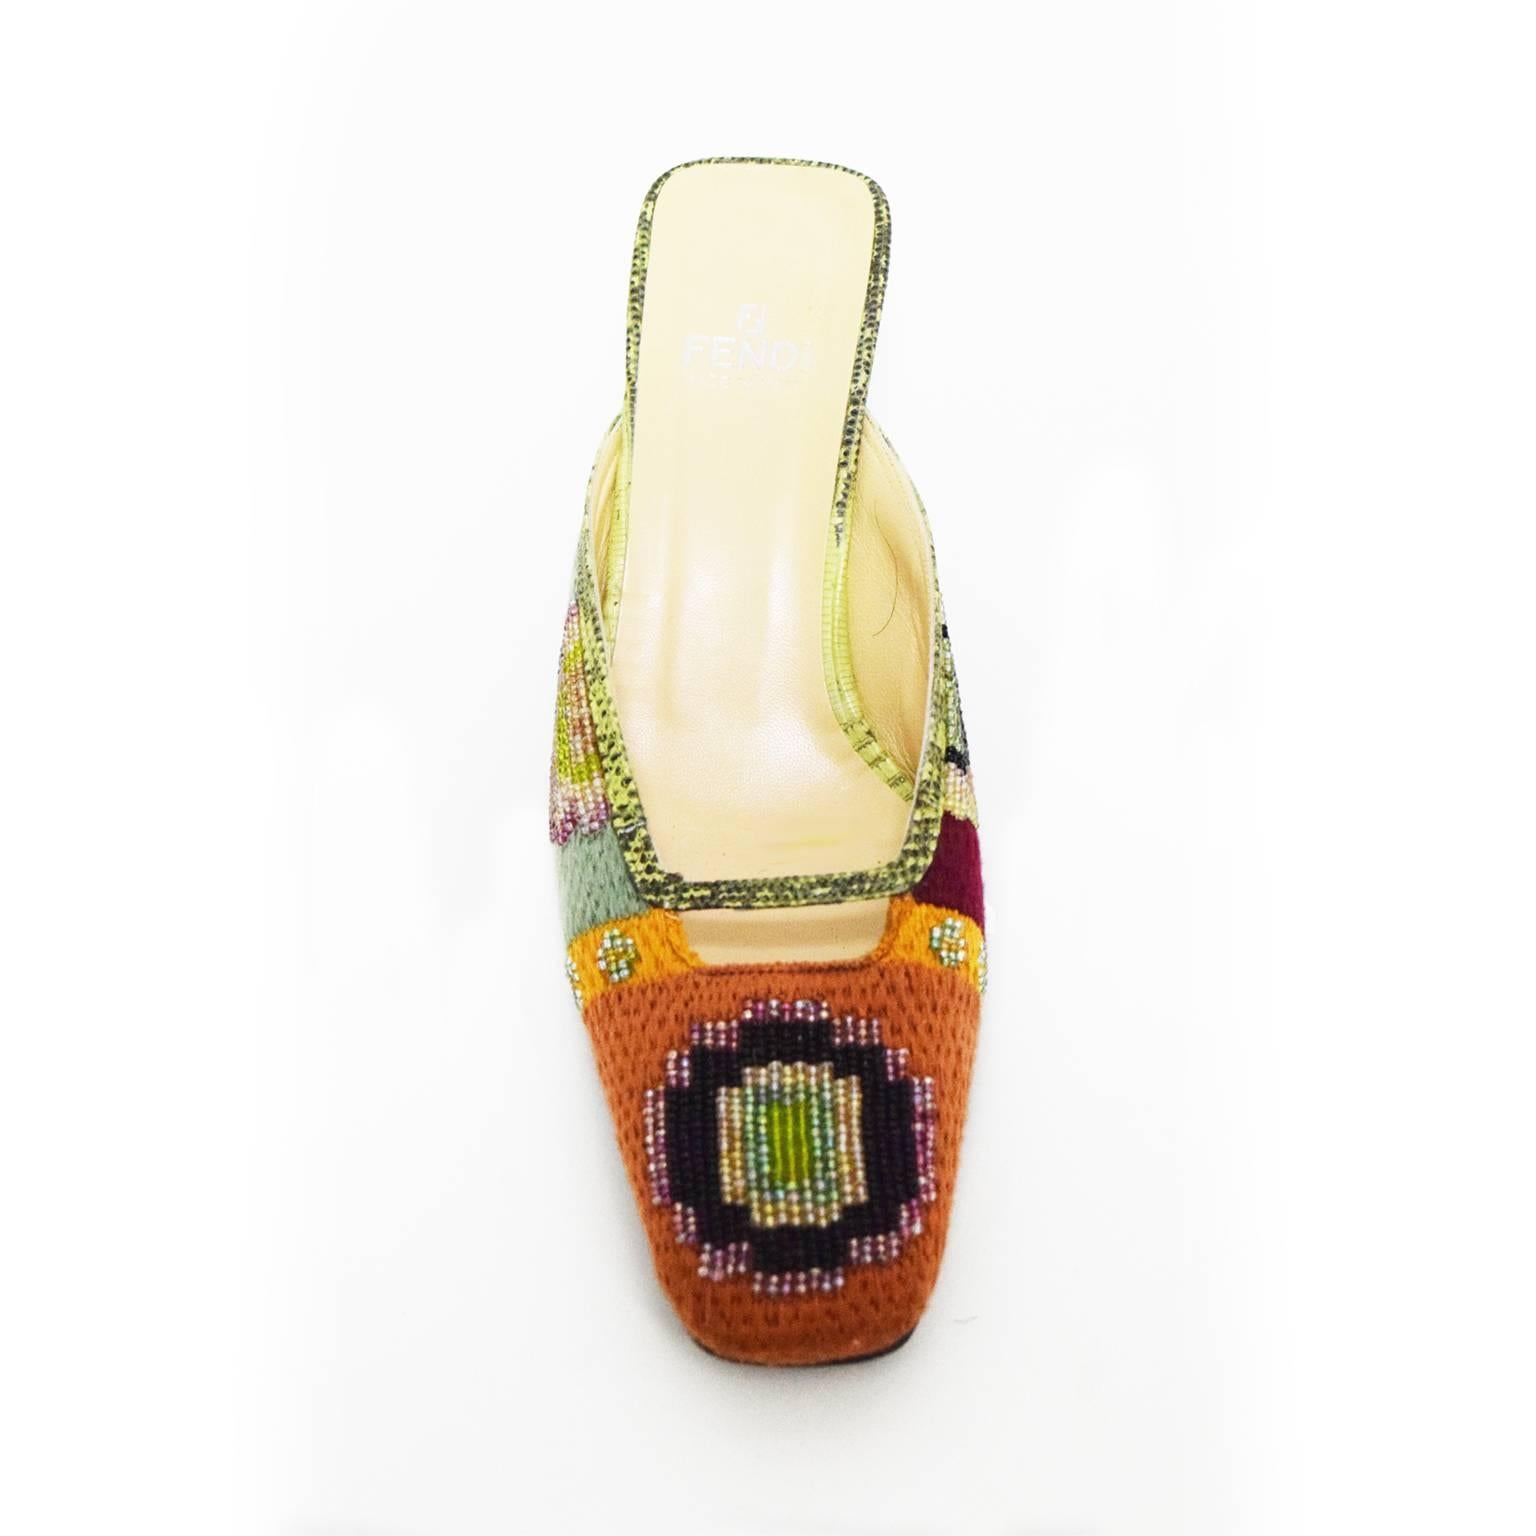 This Fendi hand beaded Mule is any fashion fanatic's collector's piece. In replica to the Fendi handbag, these shoes have a knitted overlay and glass bead embellishment. Reptile leather trim and heel add a unique touch. 